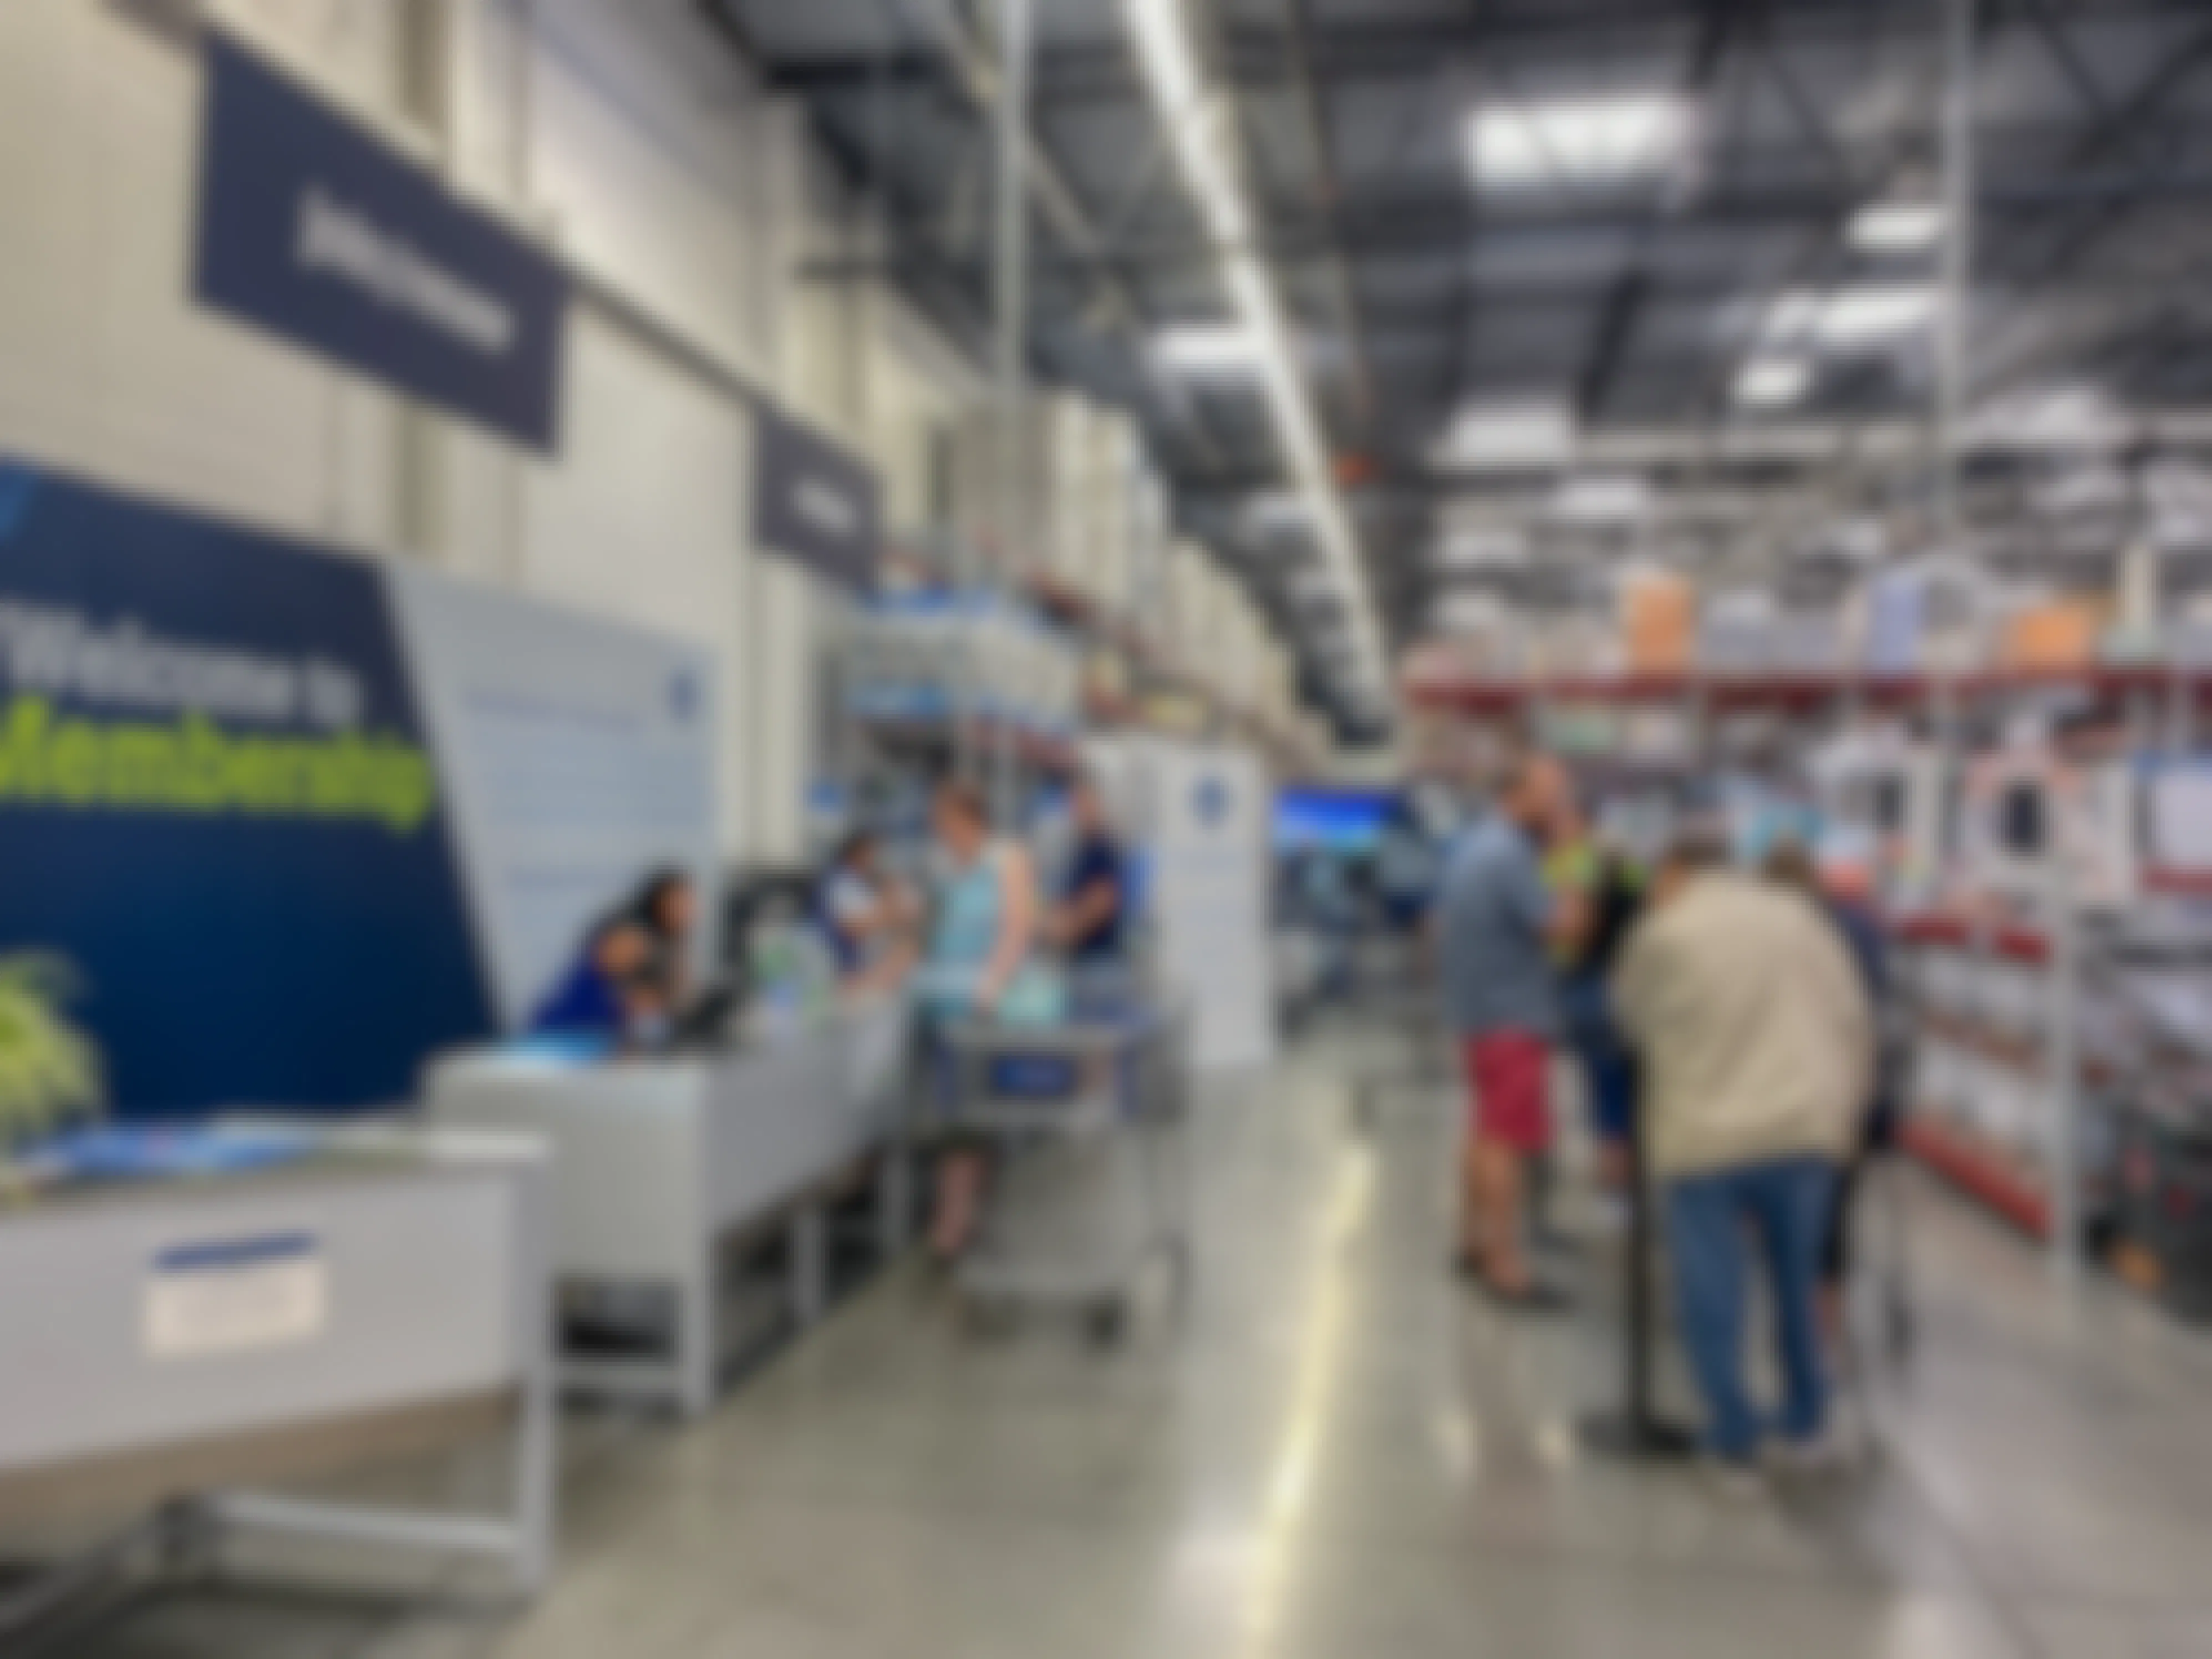 Customers standing in line, waiting to be helped at Sam's Club Customer service and returns counter.